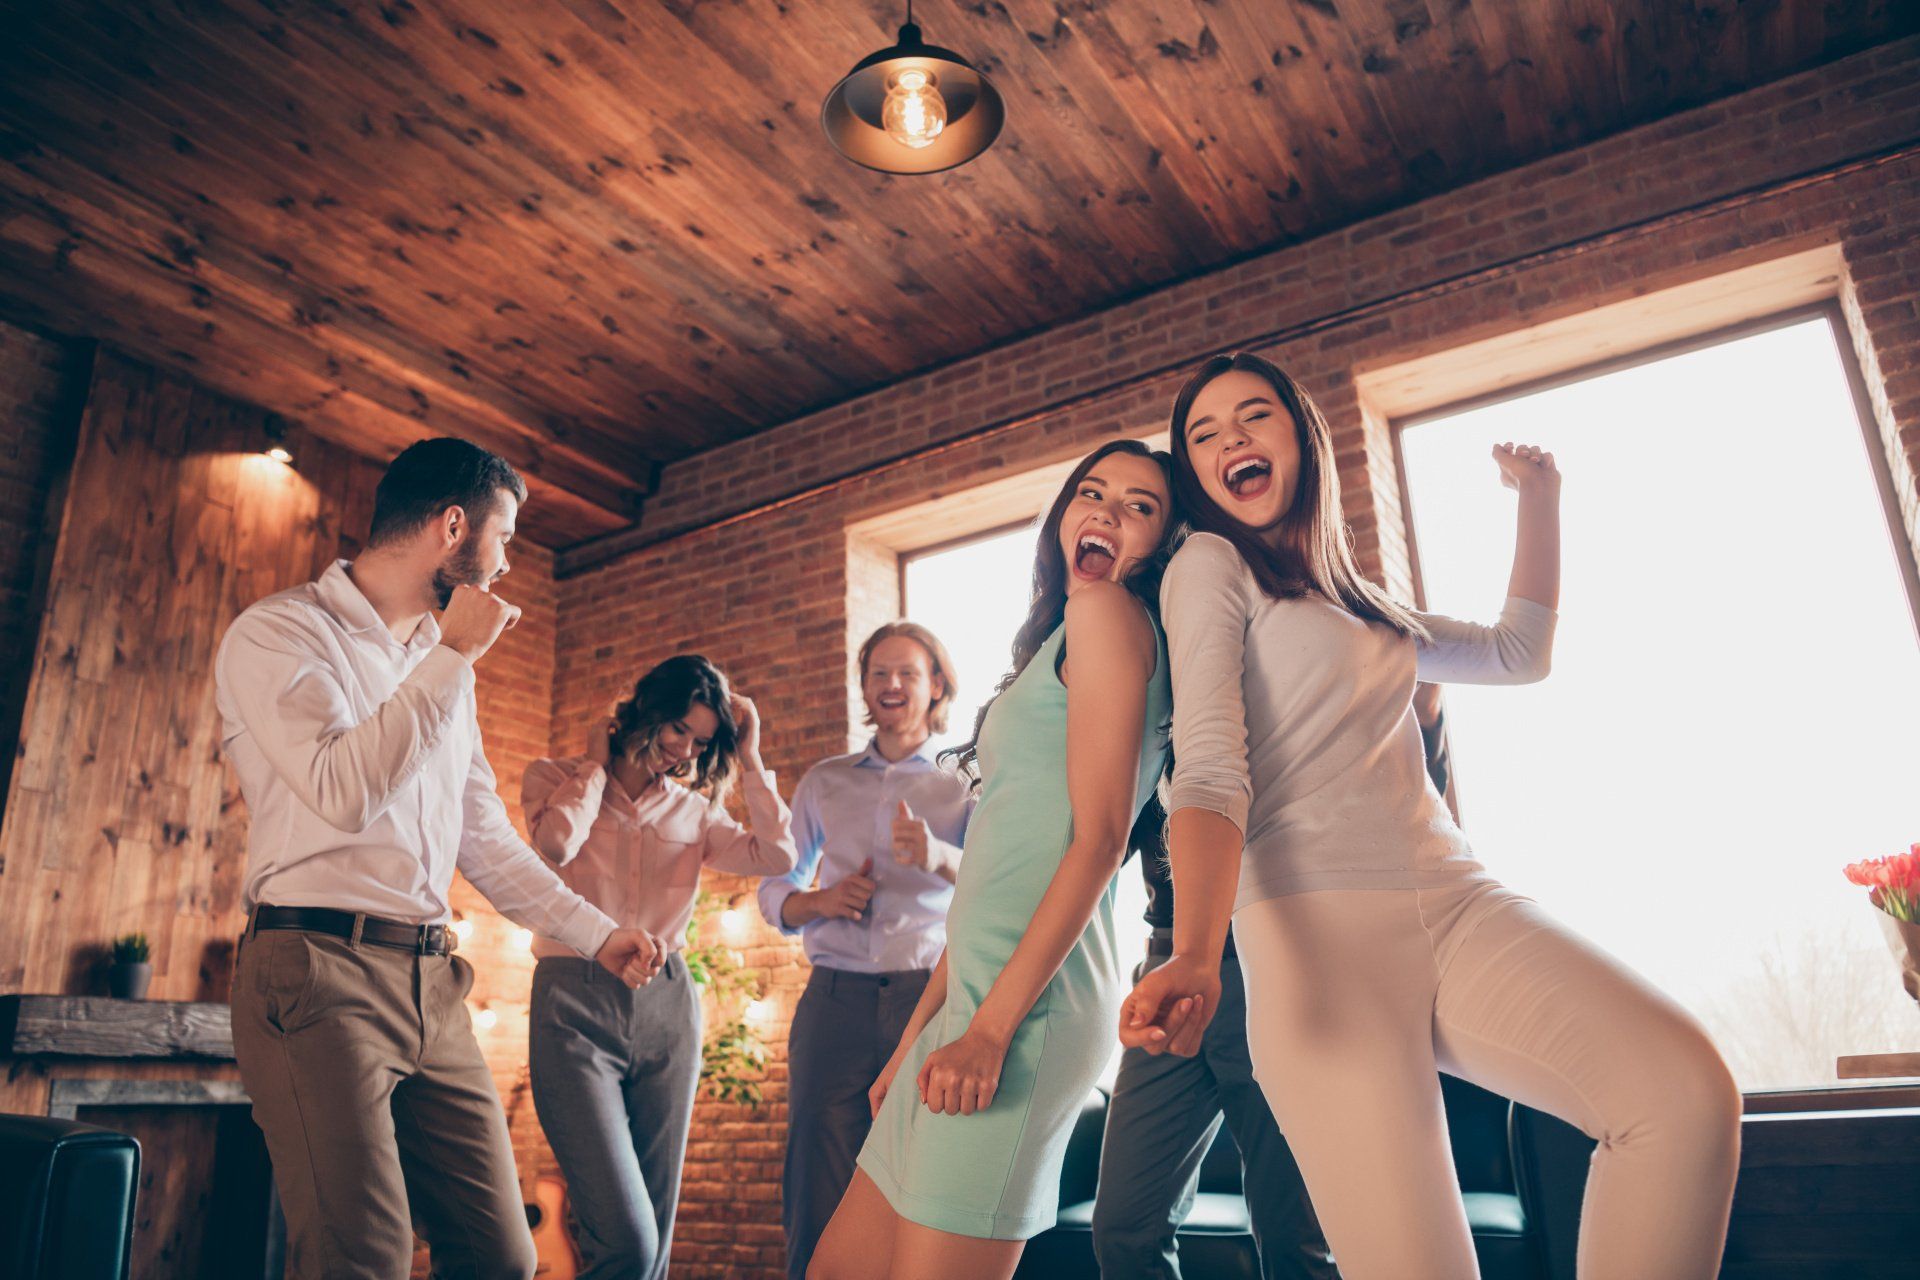 A photograph of a group of people, dancing together and smiling inside a room